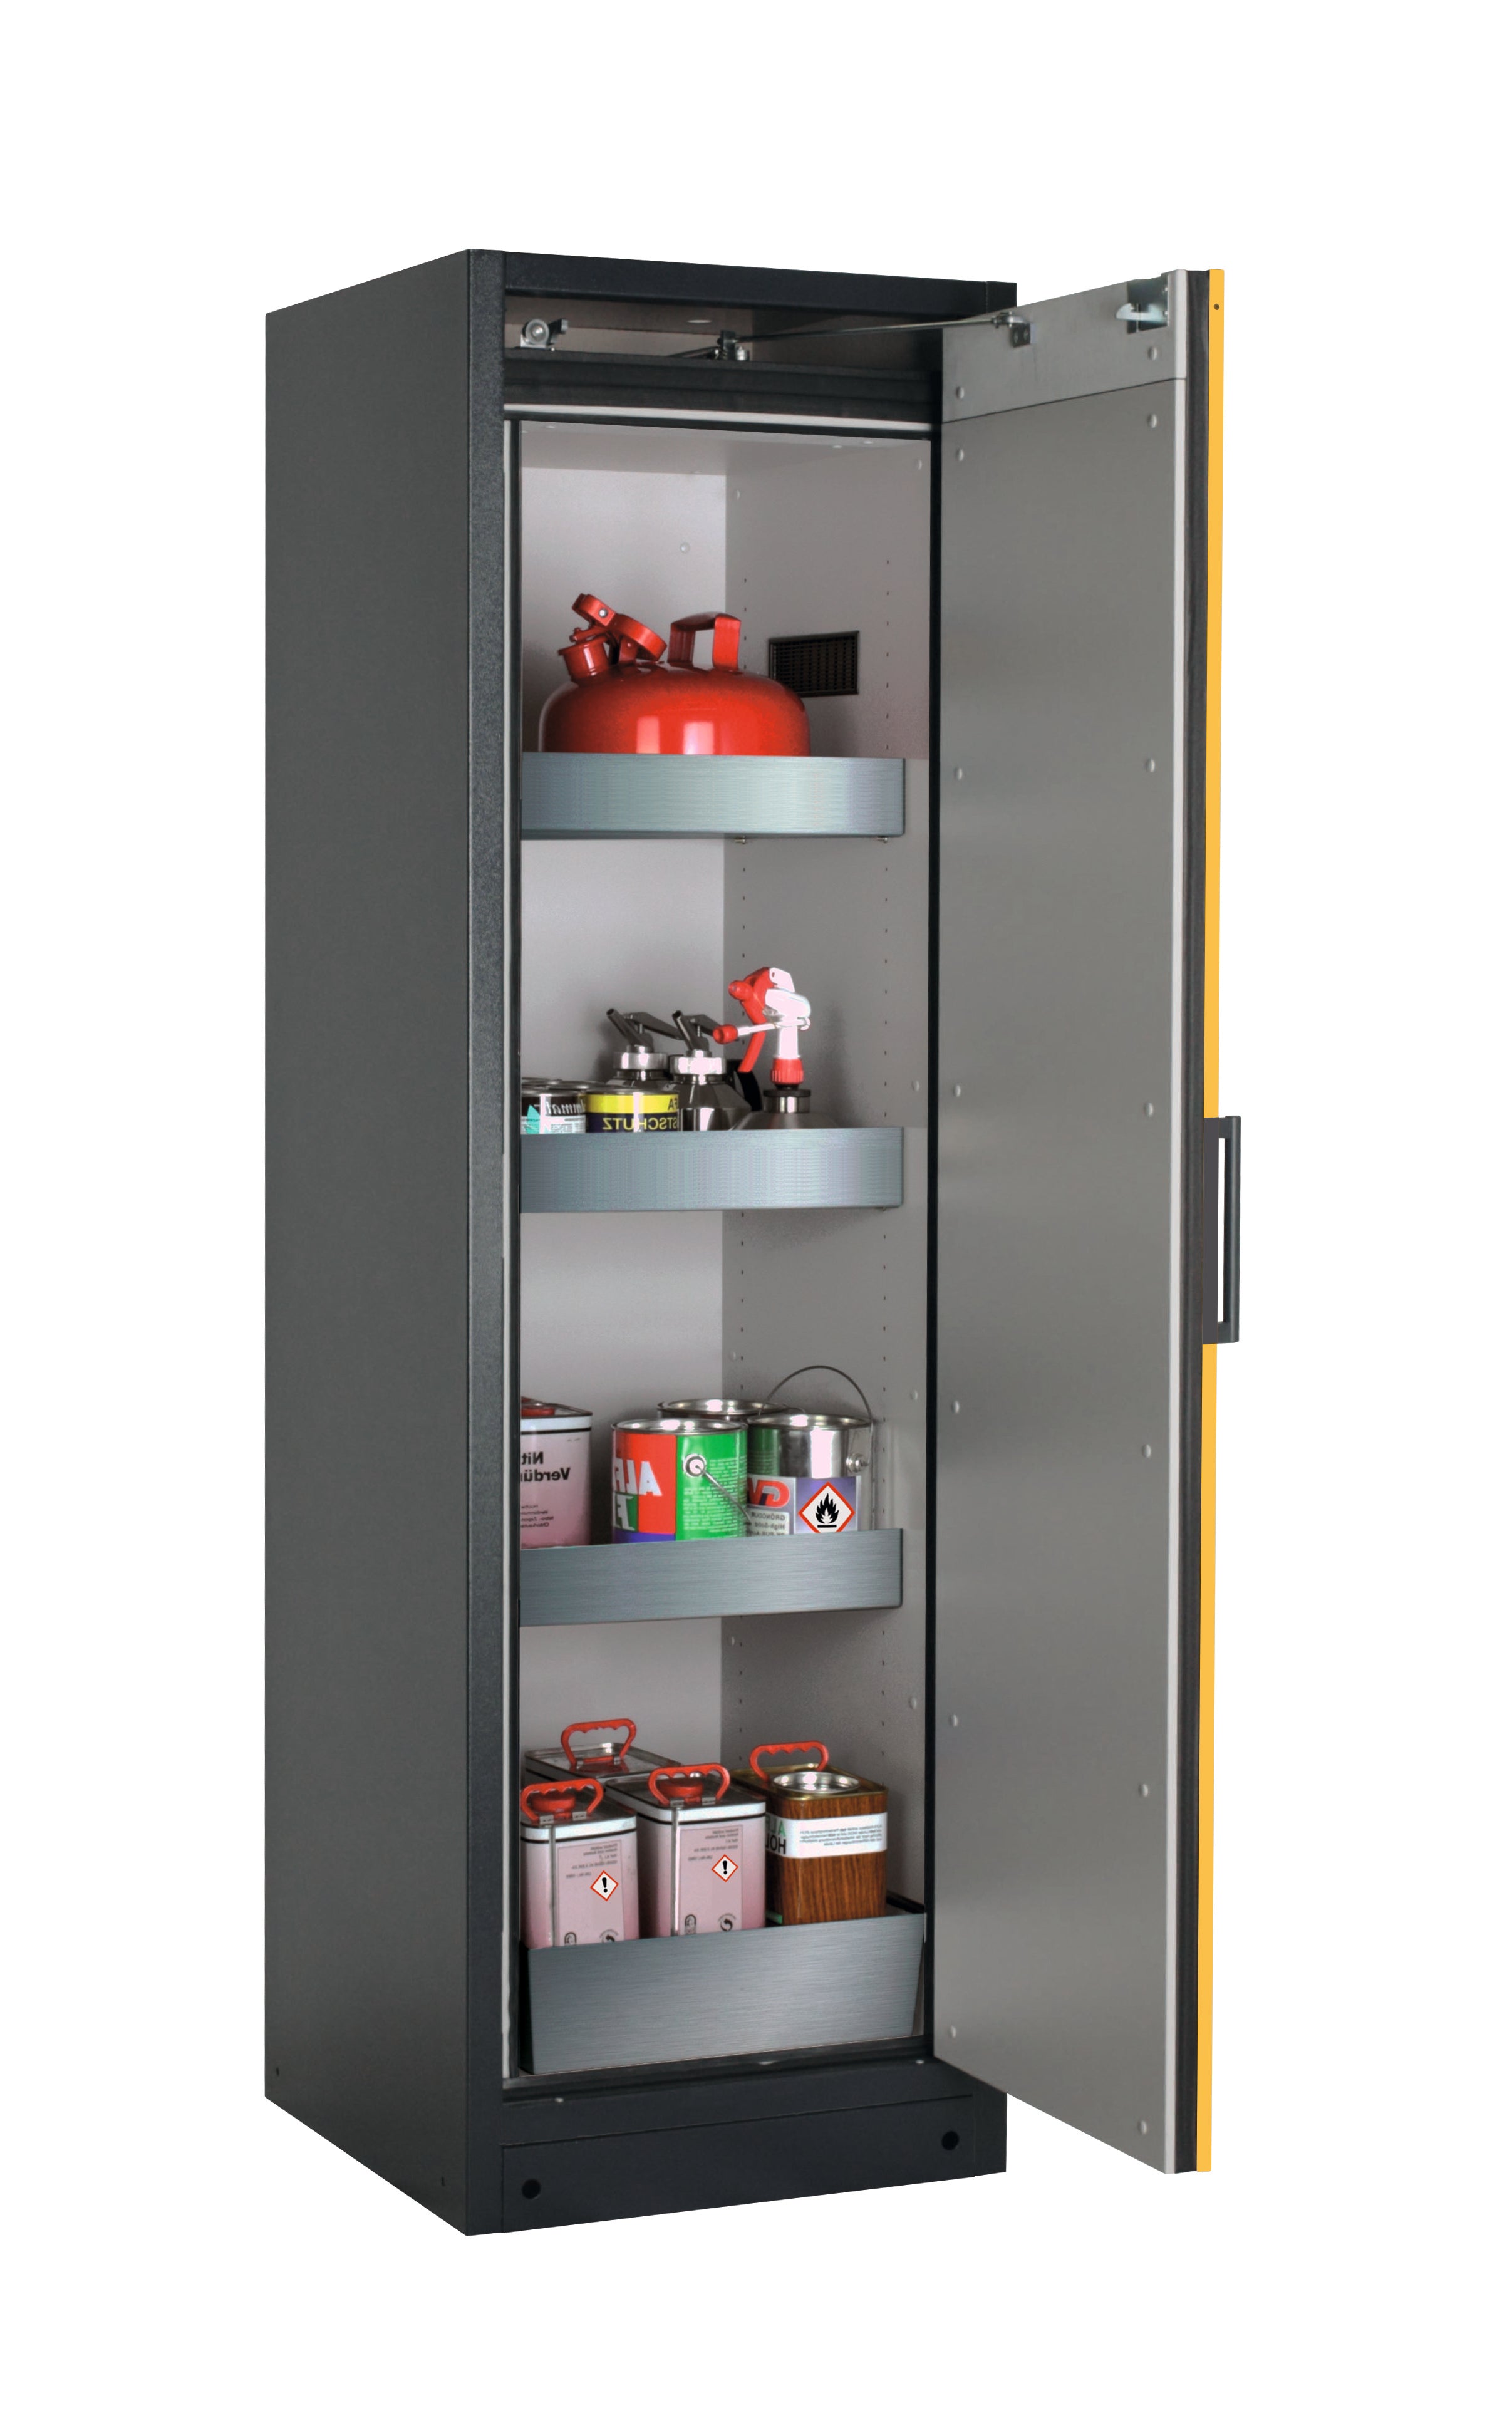 Type 90 safety storage cabinet Q-CLASSIC-90 model Q90.195.060.R in warning yellow RAL 1004 with 3x tray shelf (standard) (stainless steel 1.4301),